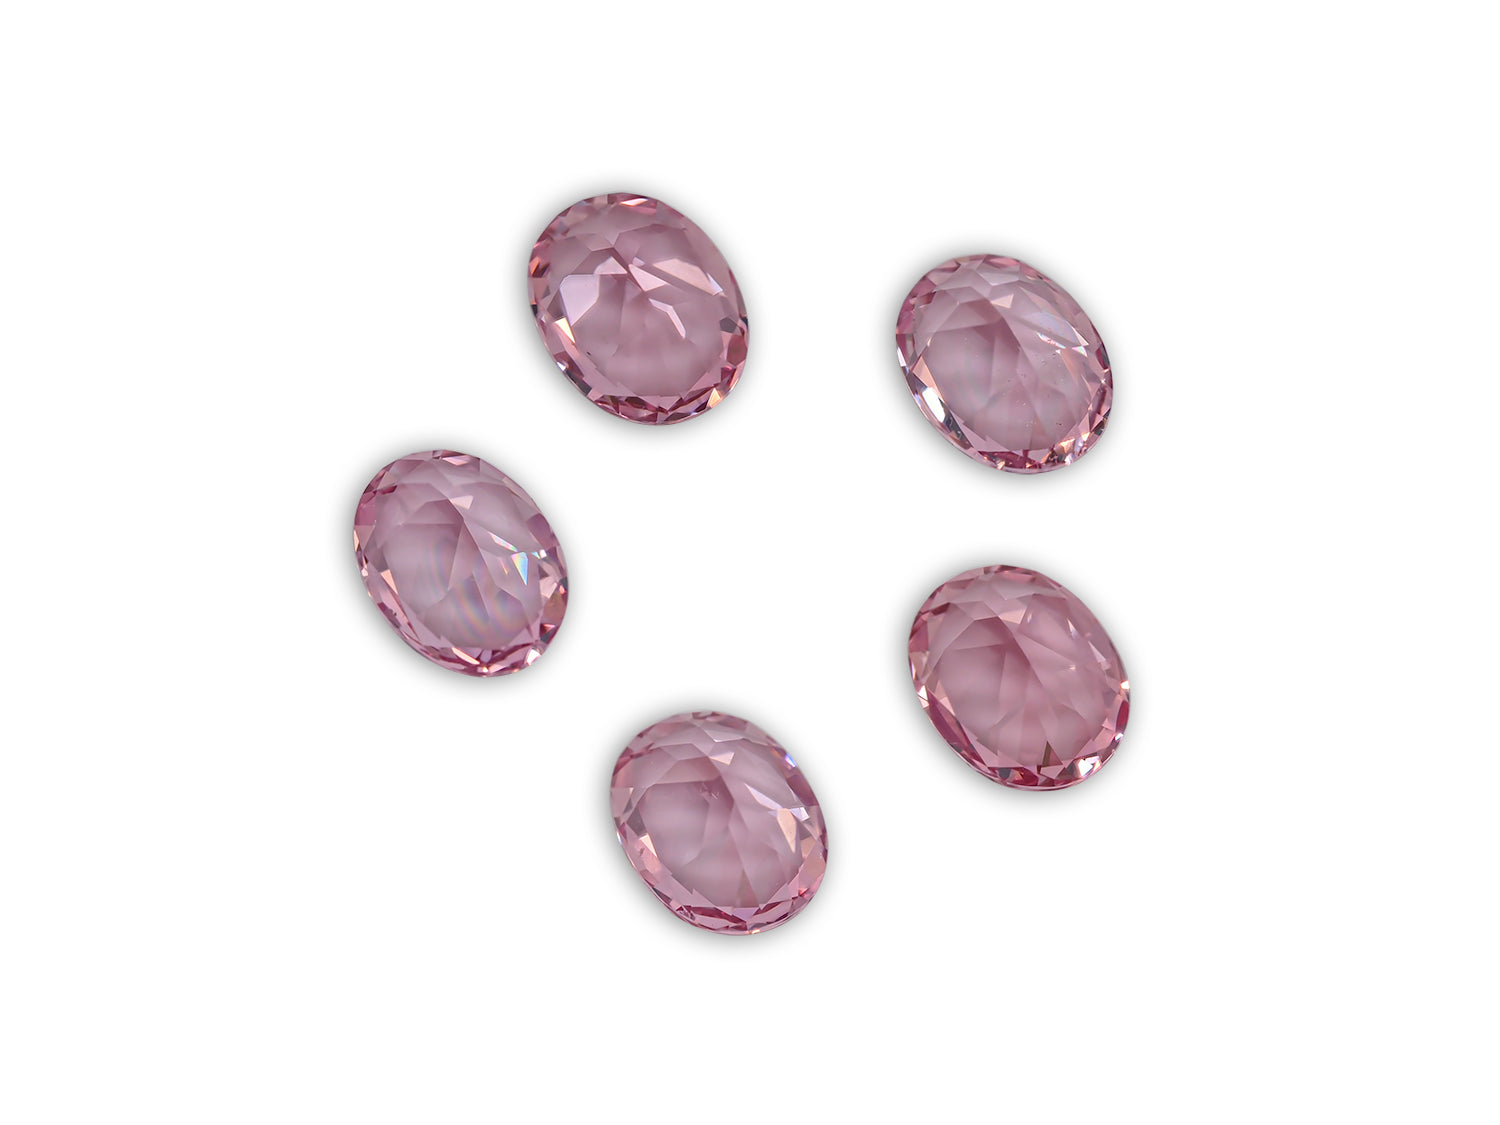 Neon Pink Spinel 2.50 CT / 5